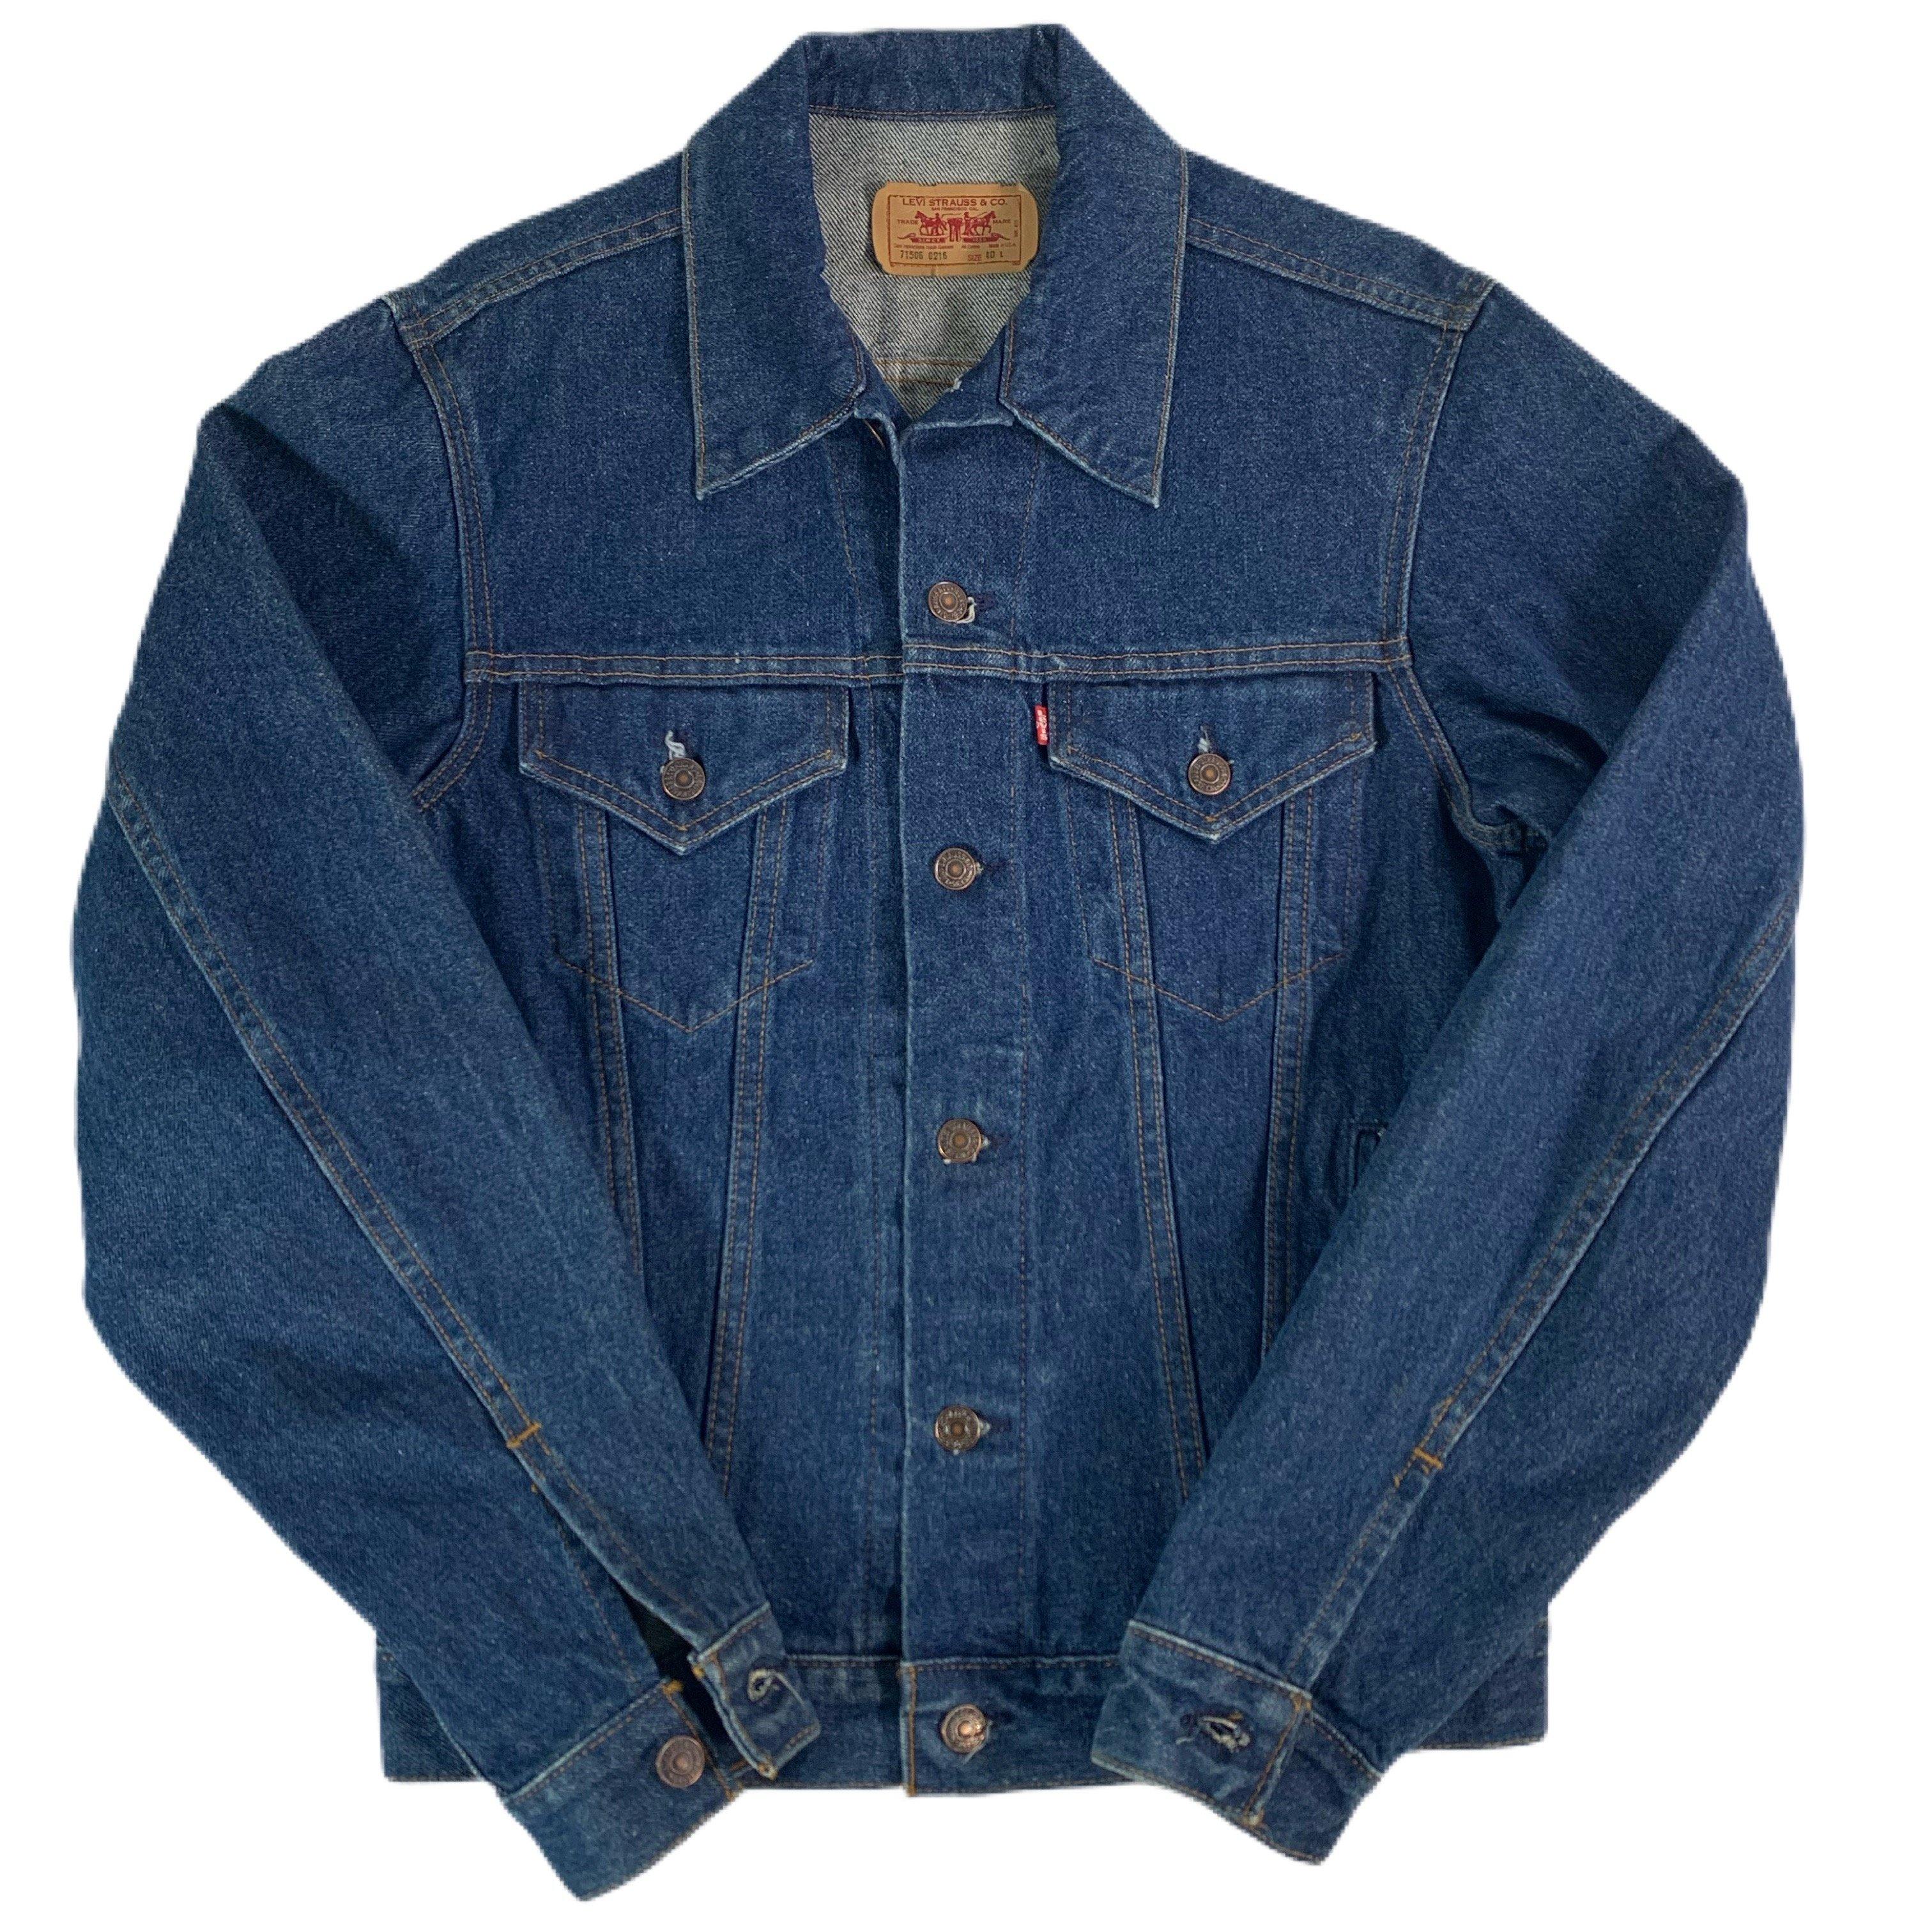 Levi's® Vintage Denim Jackets Detailed in New Book - Levi Strauss & Co :  Levi Strauss & Co